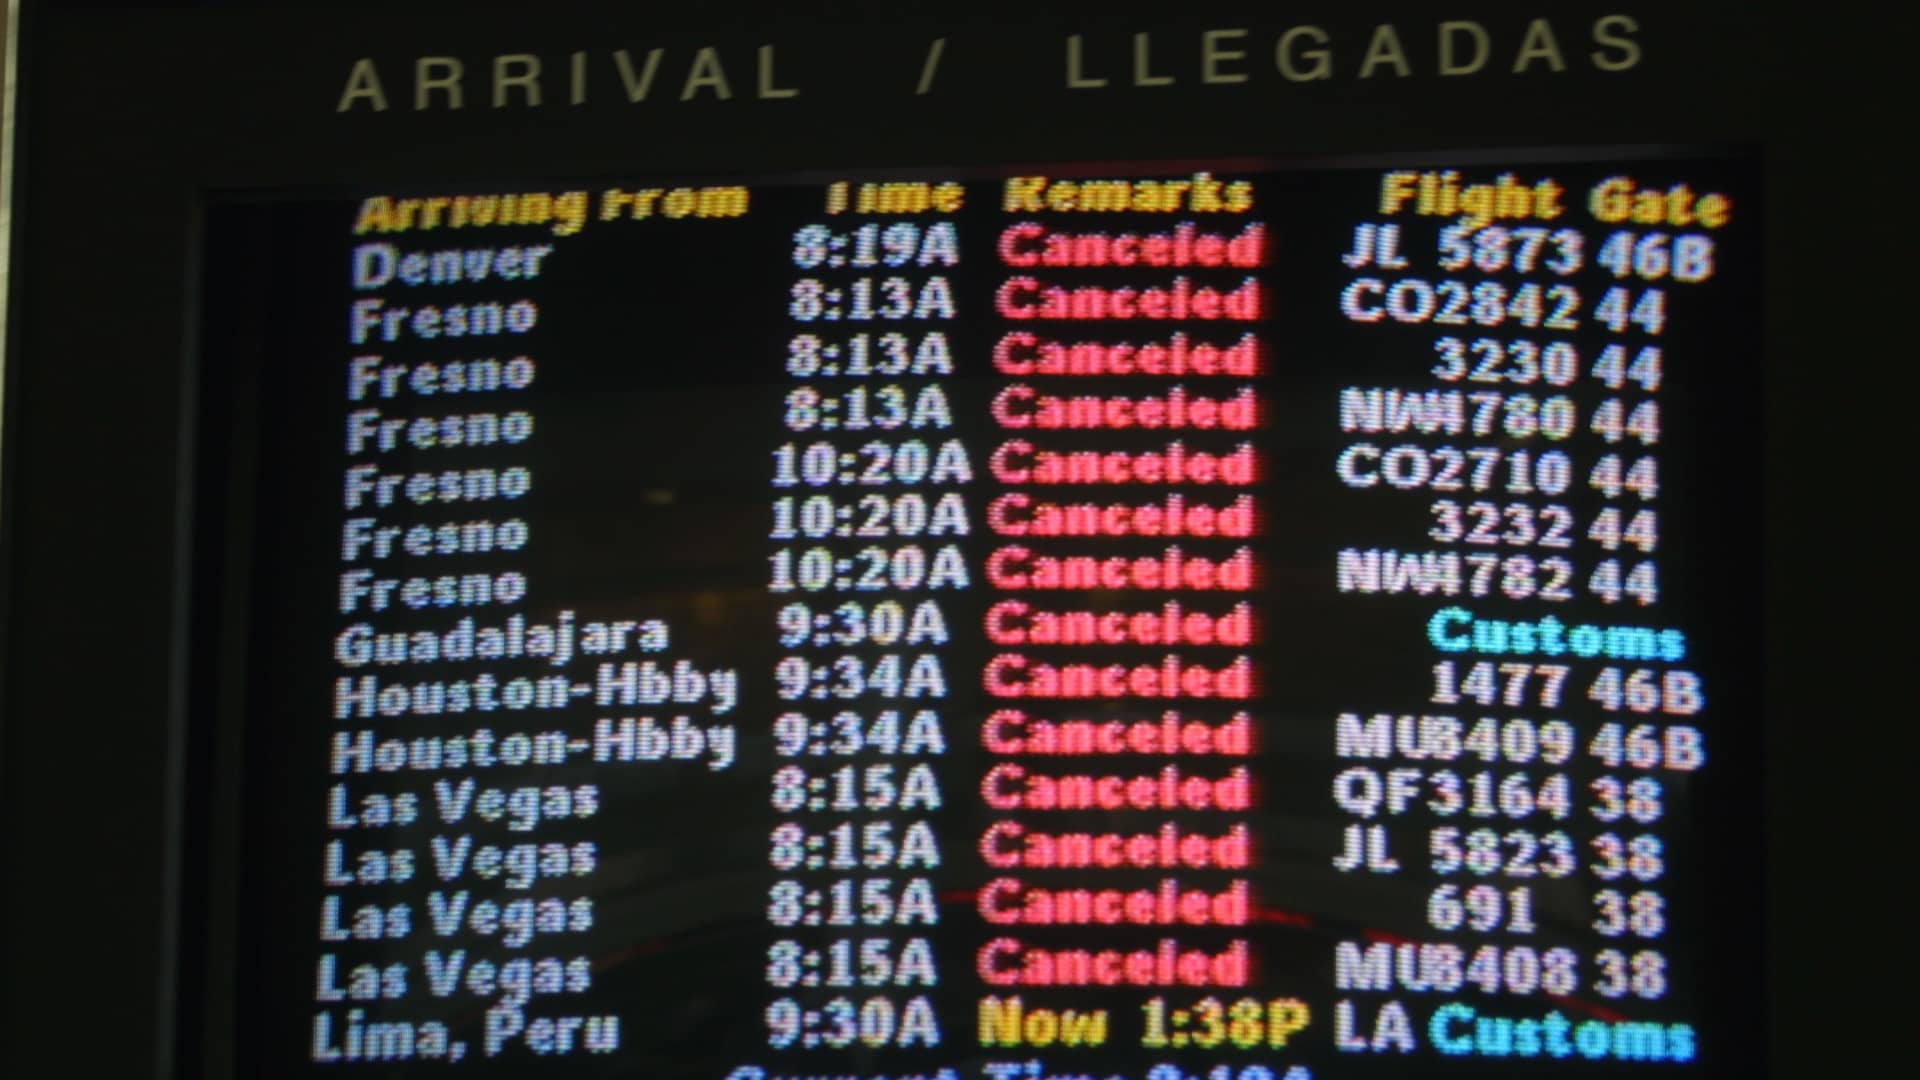 Cancelled flights are displayed on monitors at the Los Angeles Airport terminal September 10, 2001 in Los Angeles, CA.